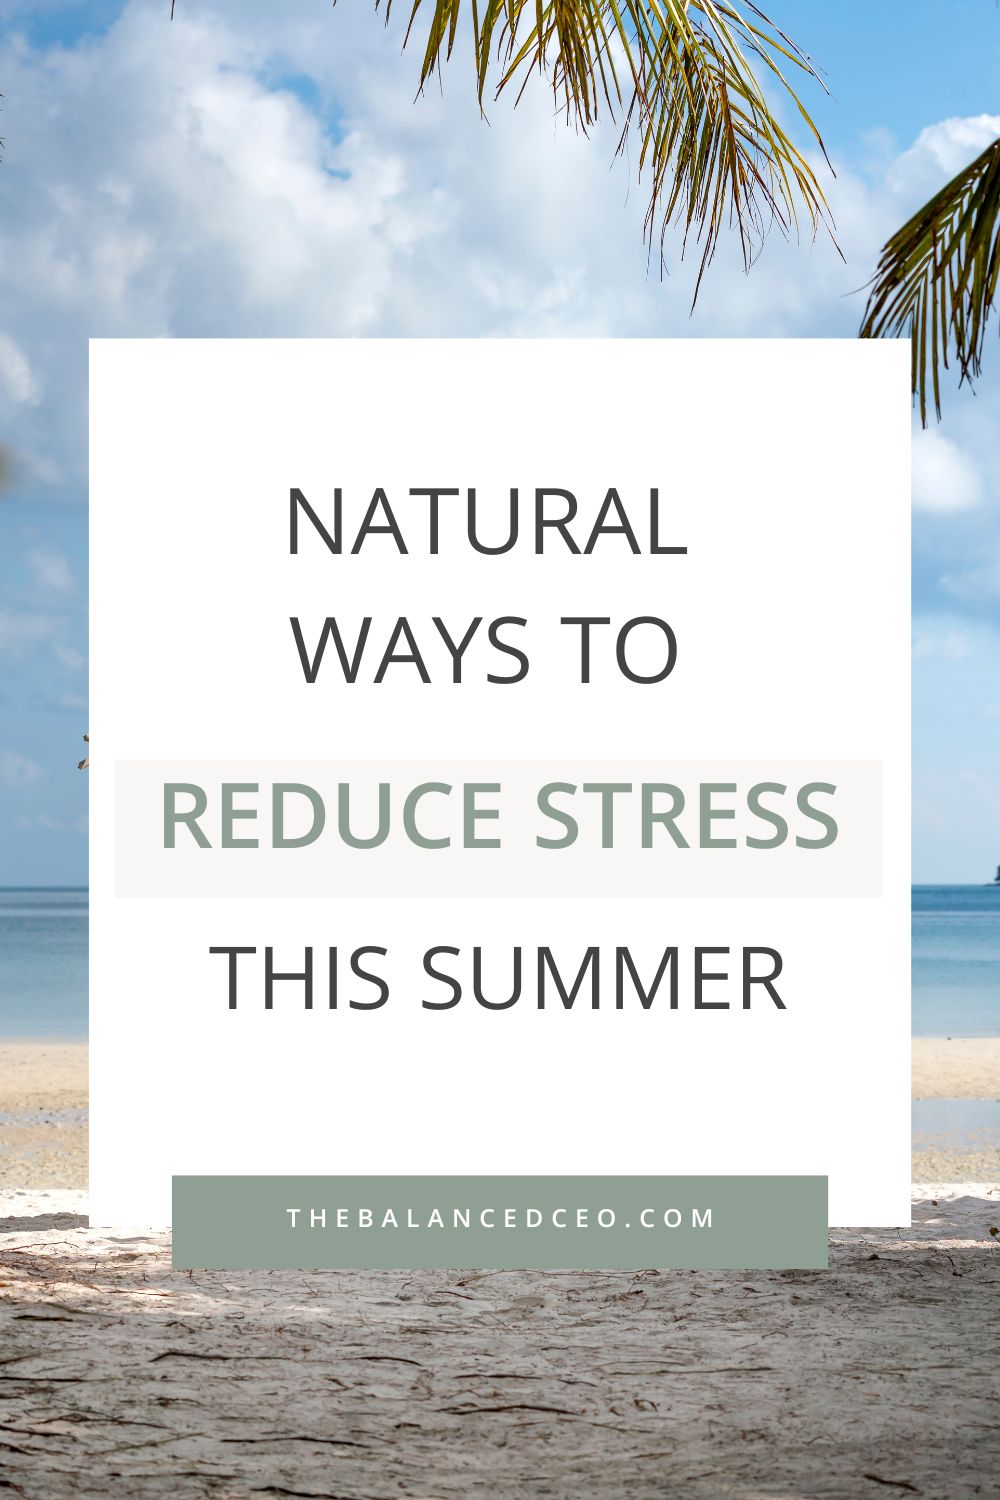 Natural Ways to Relieve Stress This Summer